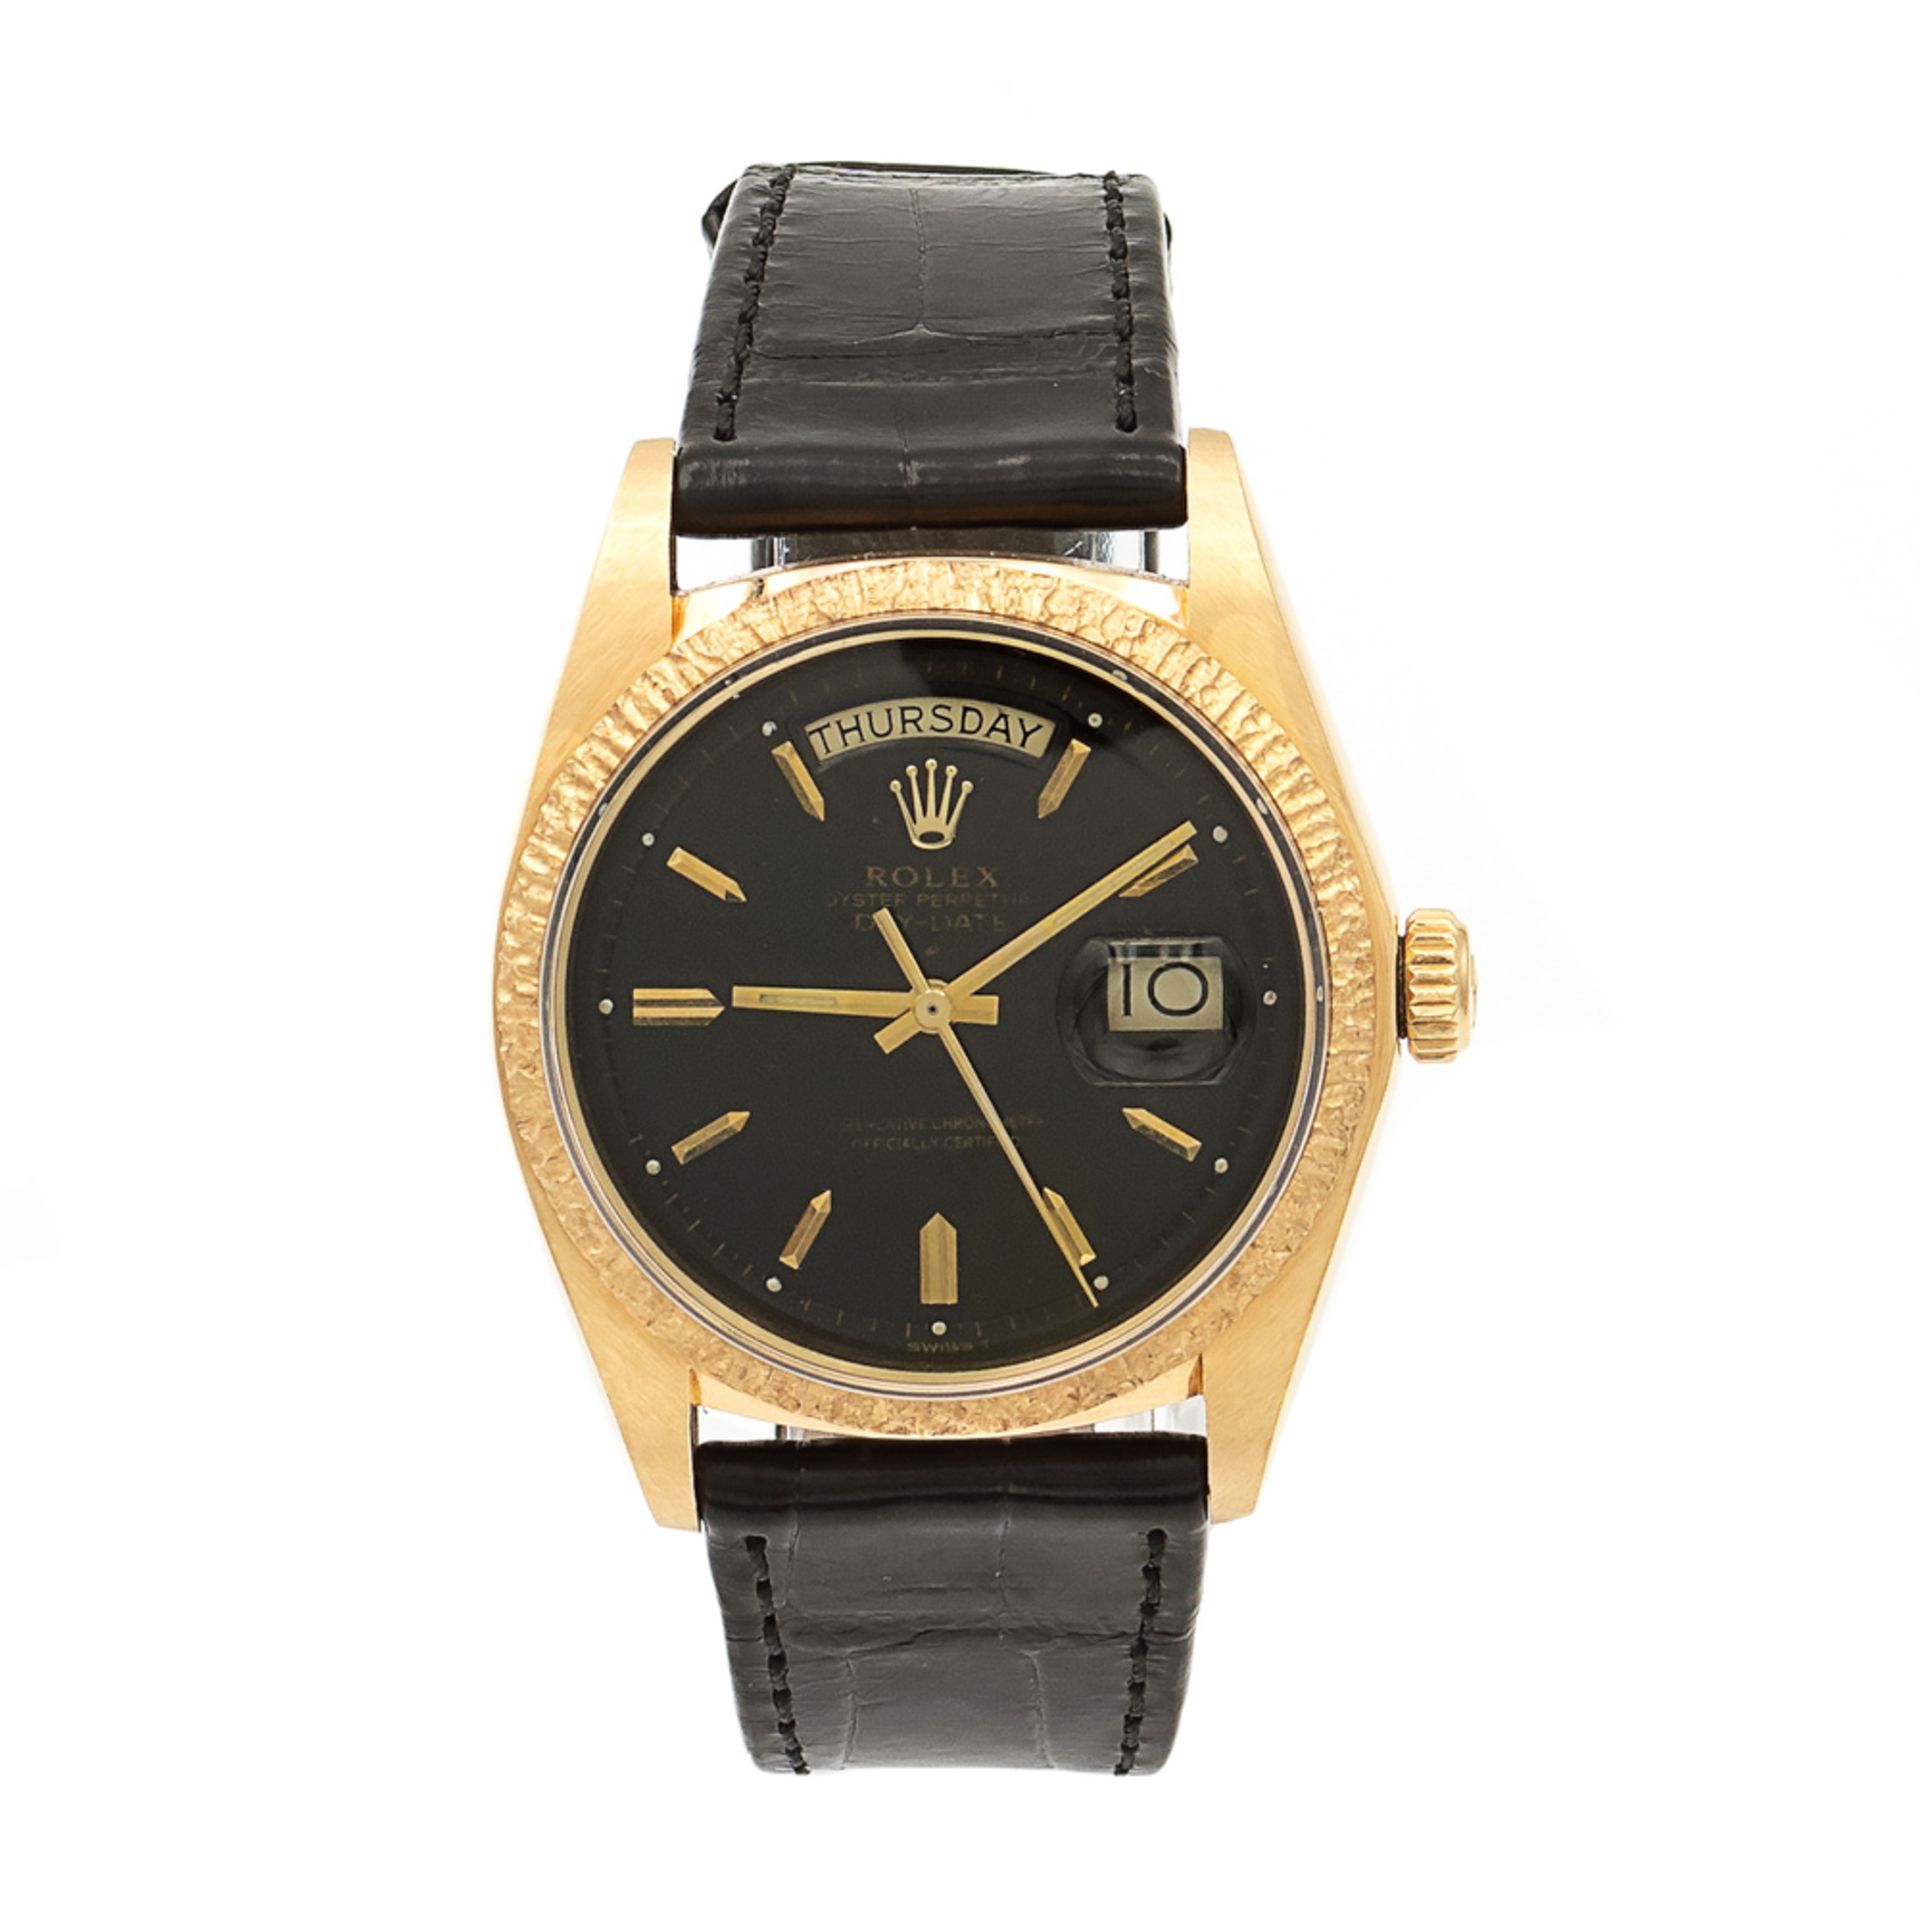 Rolex President Oyster Perpetual Day-Date, vintage wrist watch 1970s